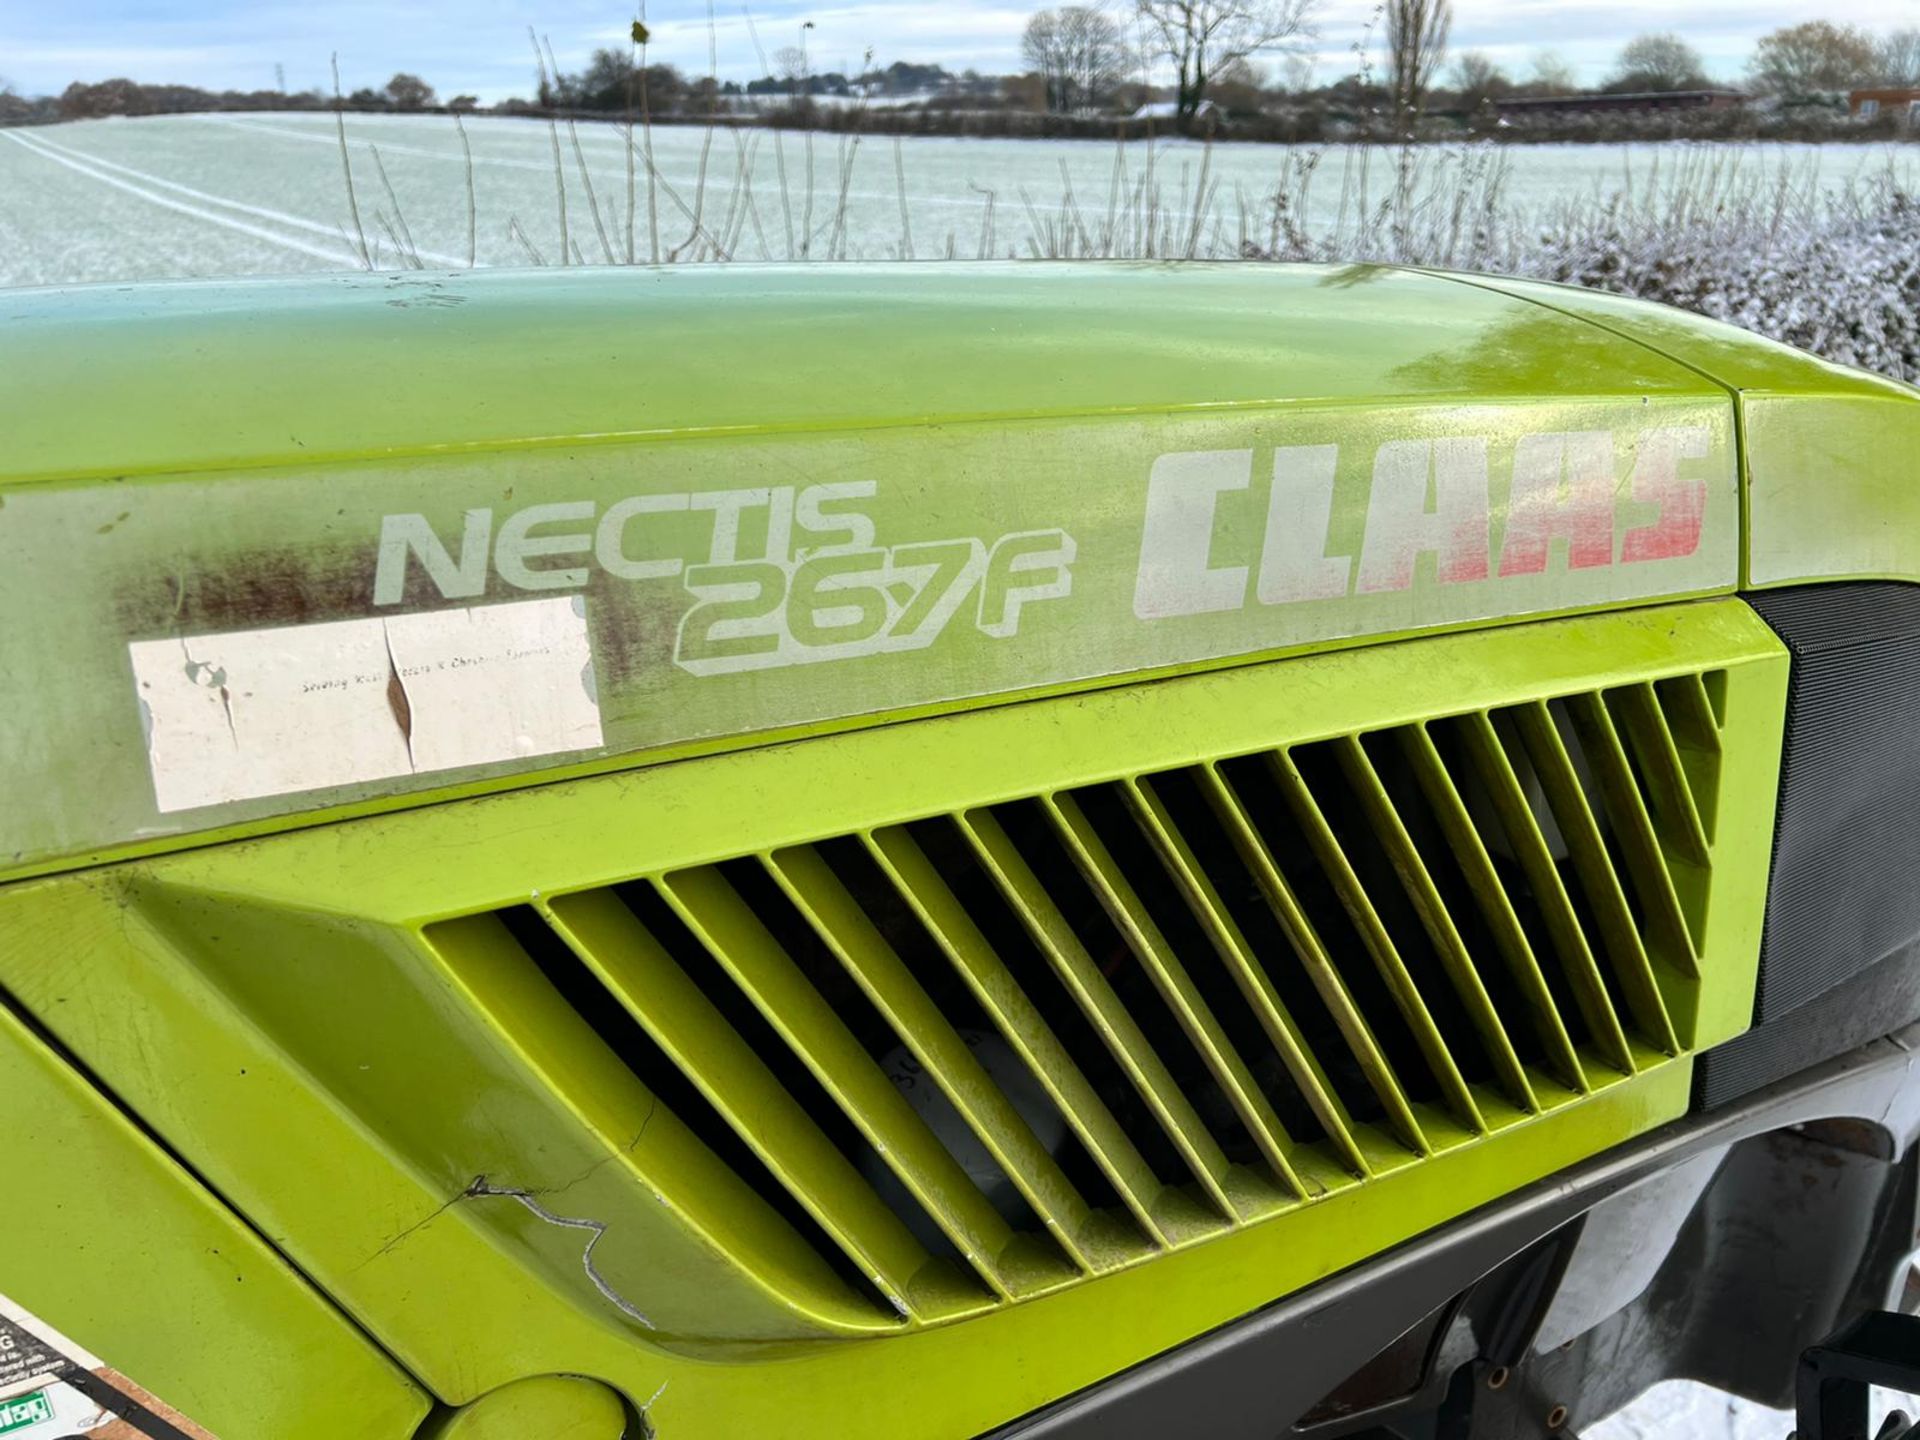 2008 Claas Nectis 267F 97HP 4WD Compact Tractor, Runs Drives And Works *PLUS VAT* - Image 16 of 16